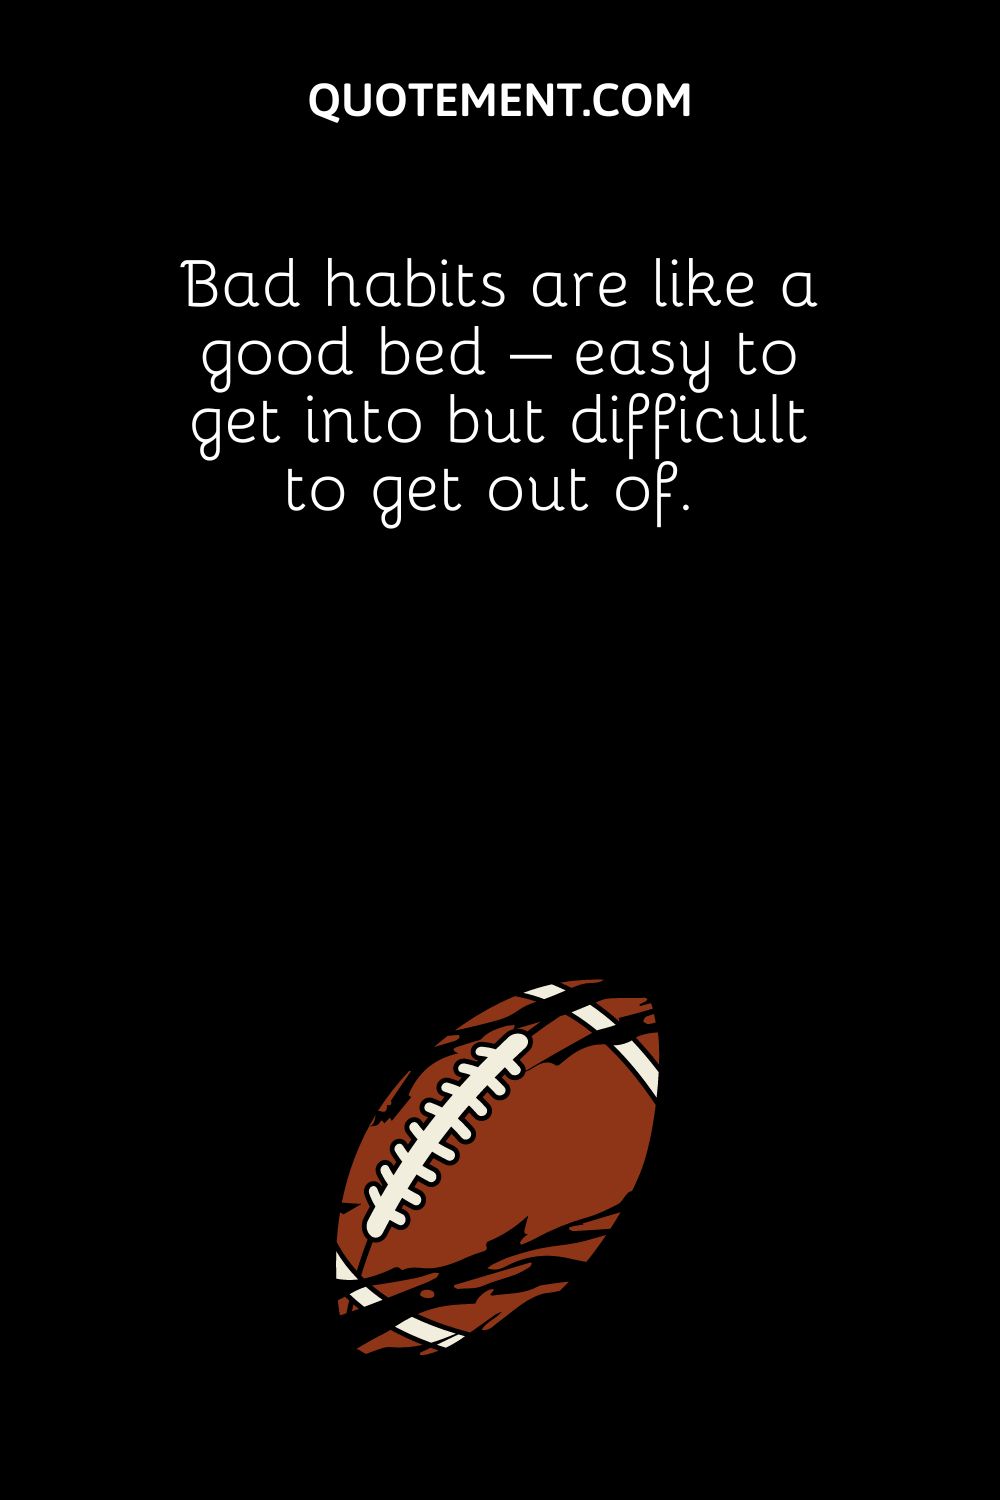 Bad habits are like a good bed